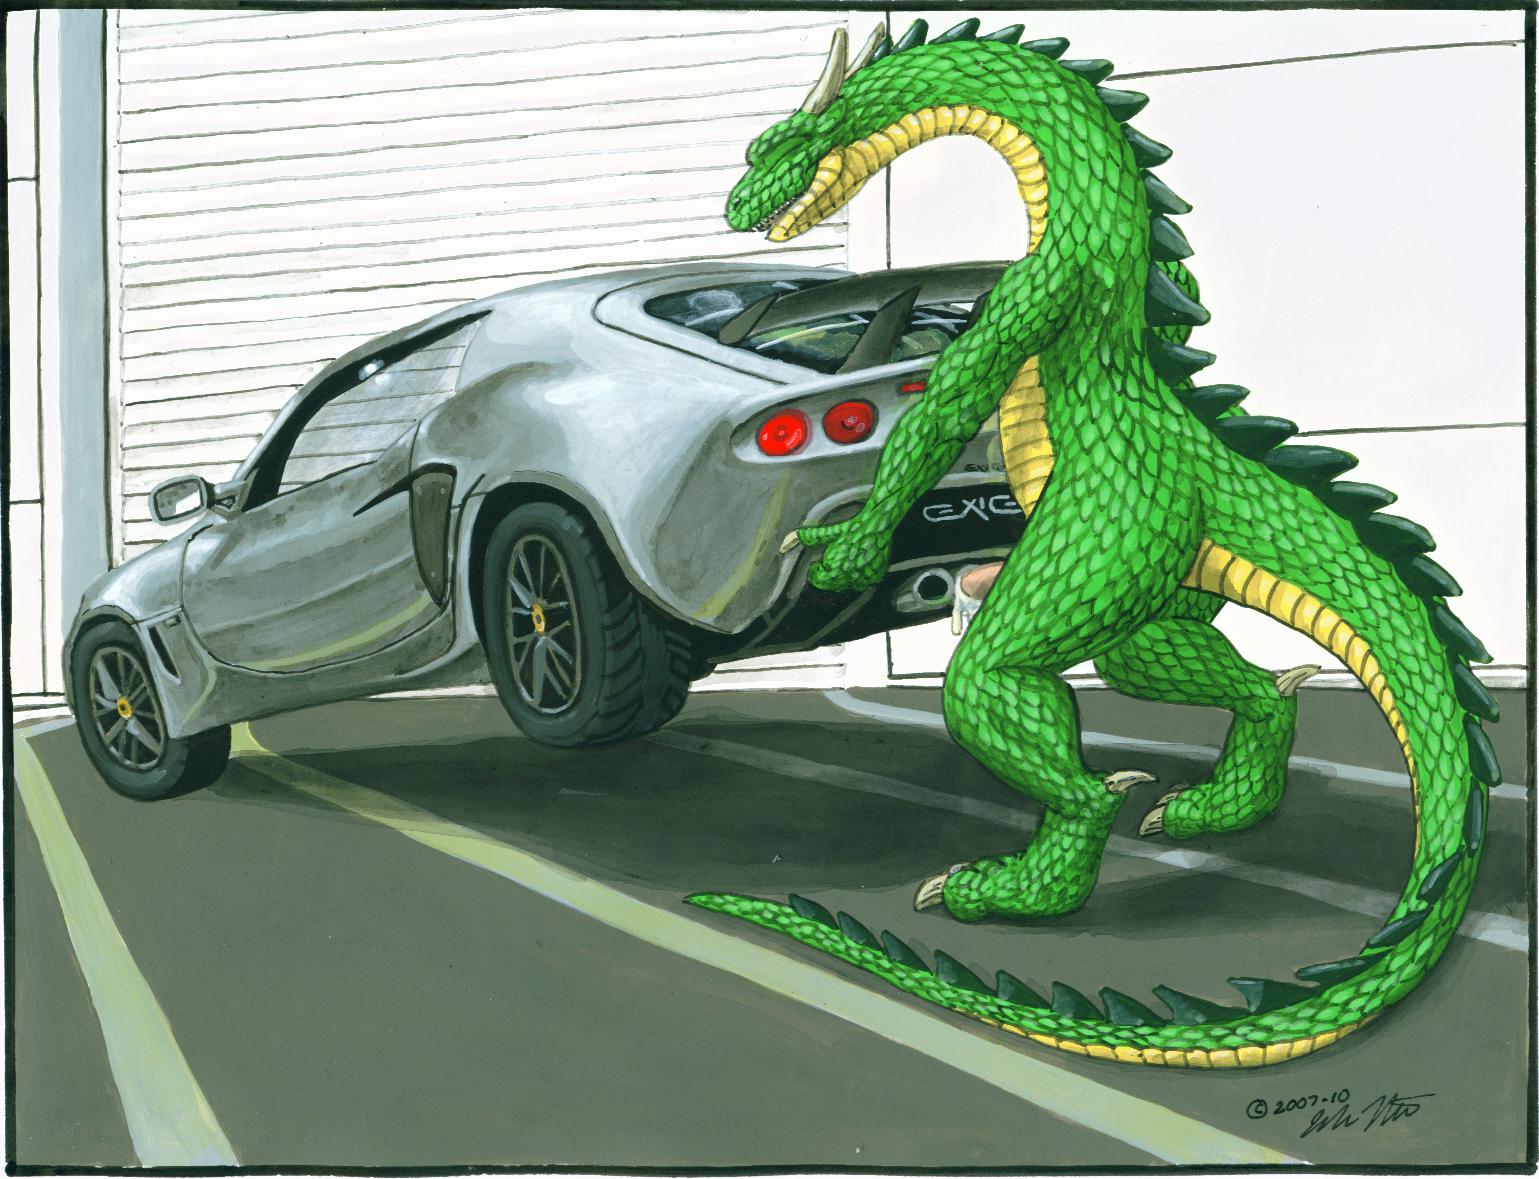 yiffing.in - Gallery: DRAGONS AND CARS.